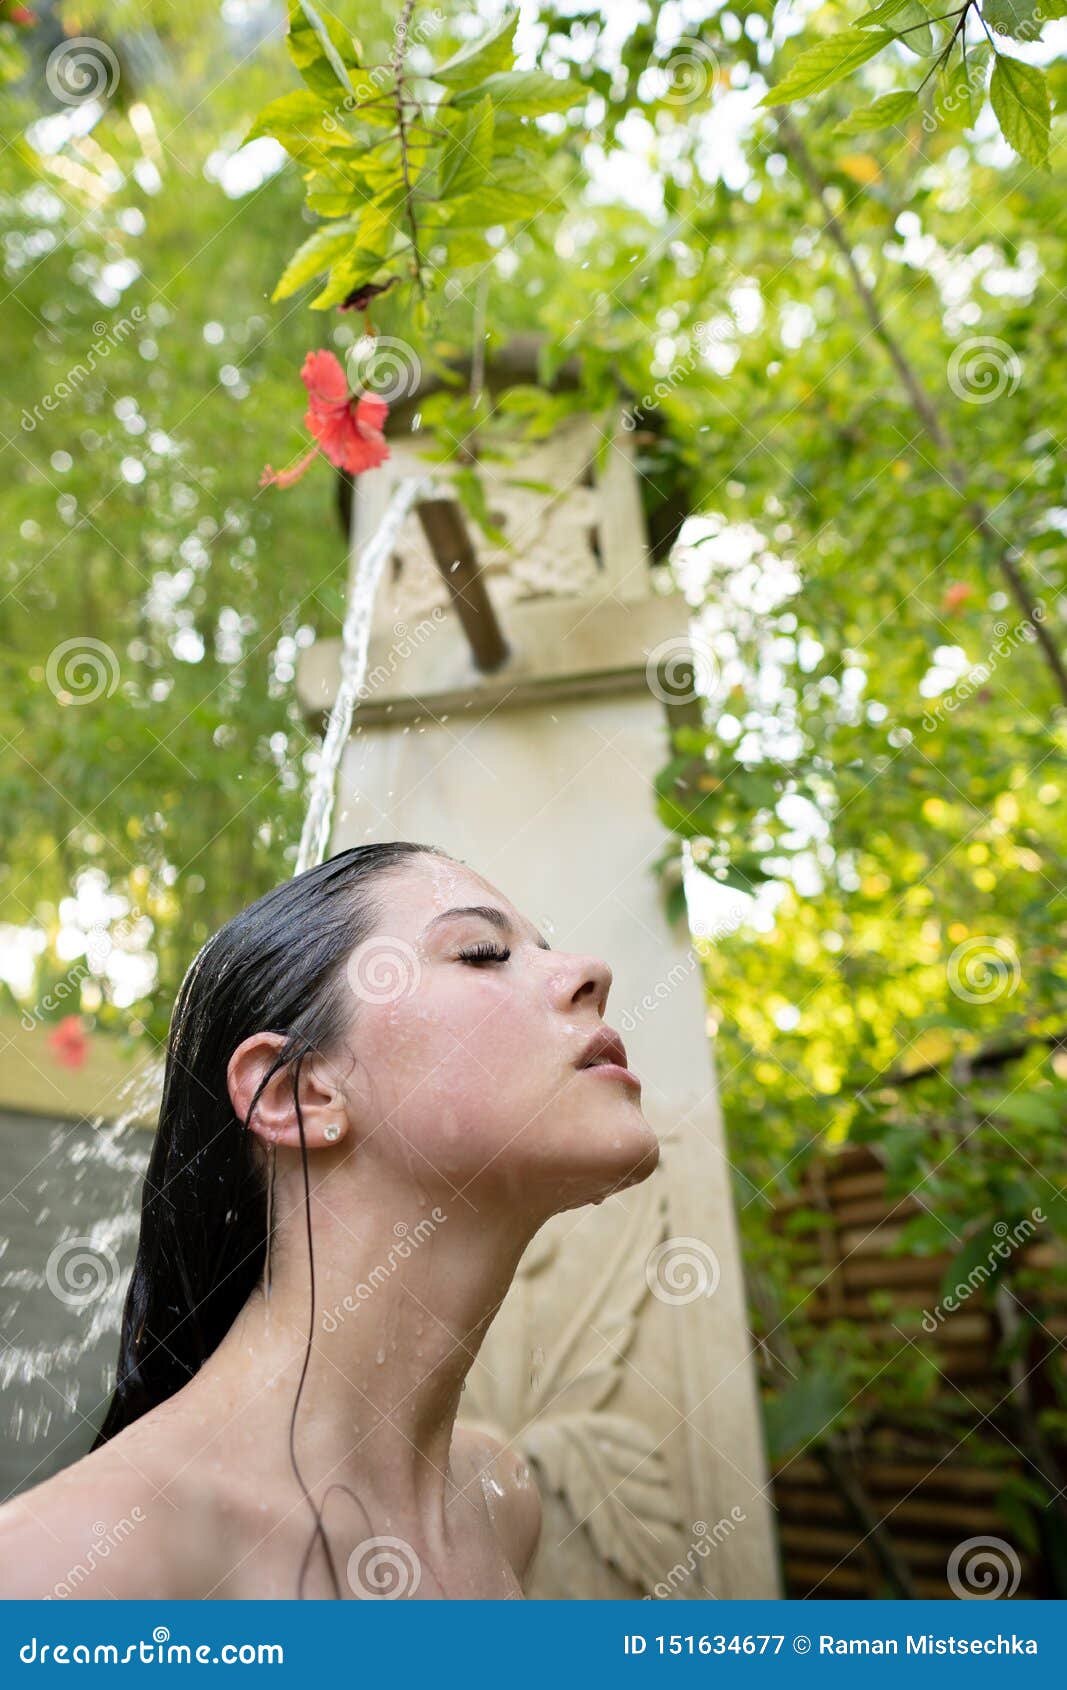 A Young Girl Is Taking A Shower Outdoors Stock Image Image Of Outdoors Cool 151634677